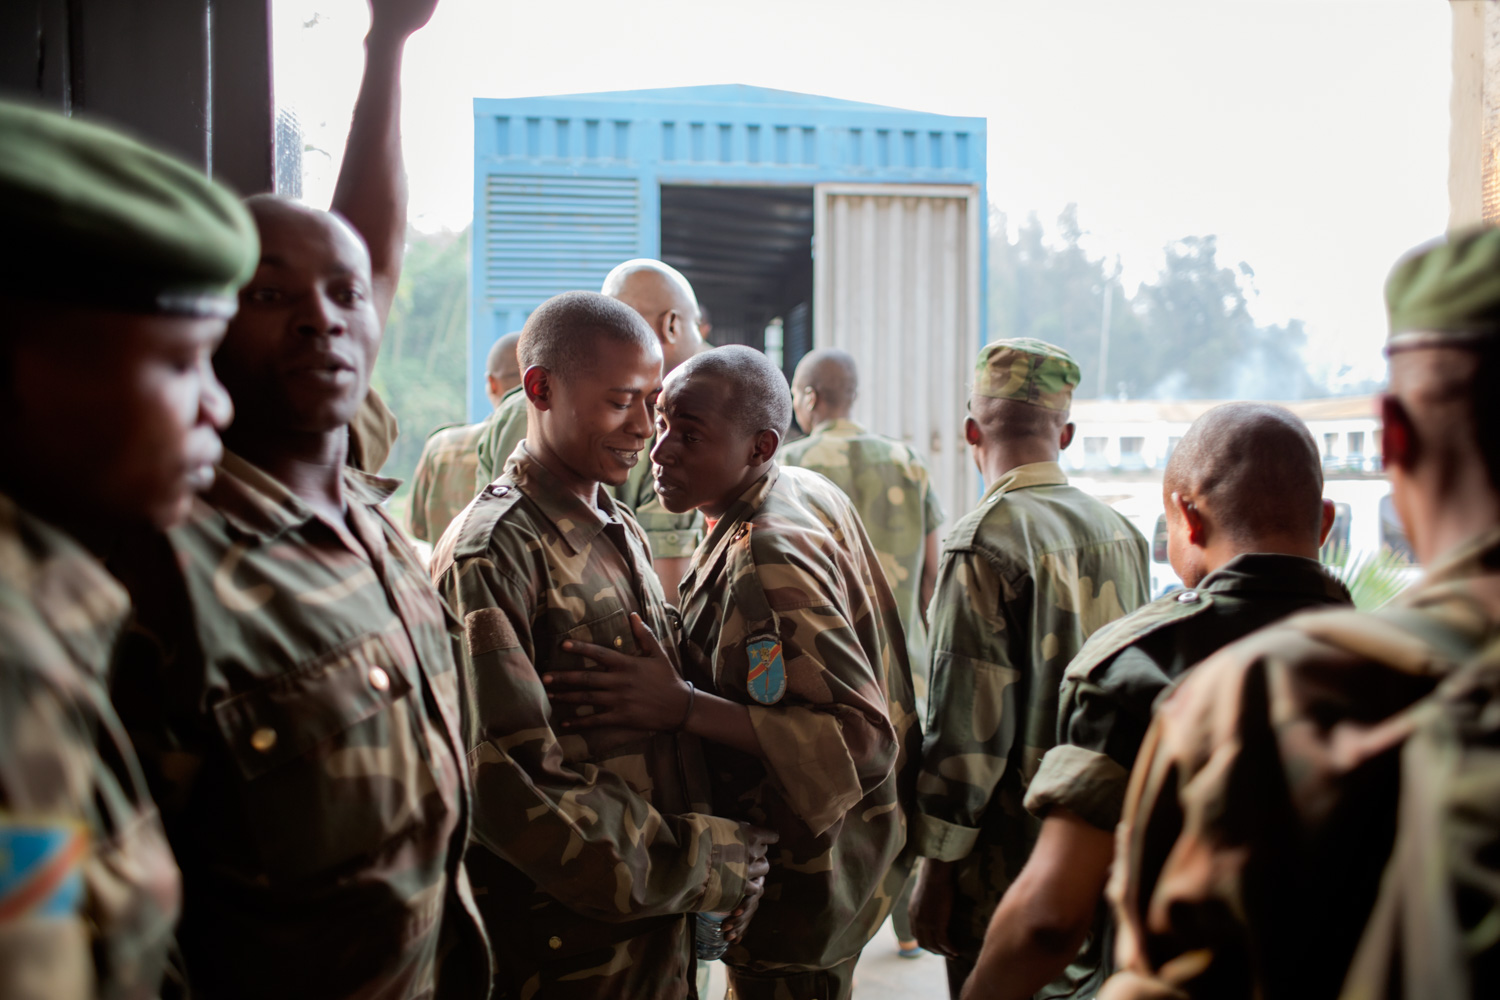  At the end of the trial day, the lower-ranked FARDC soldiers pile into a truck that will transport them back into custody. The twelve higher-ranked officers on trial left on their own accord. They were not in custody and were able to move freely. 